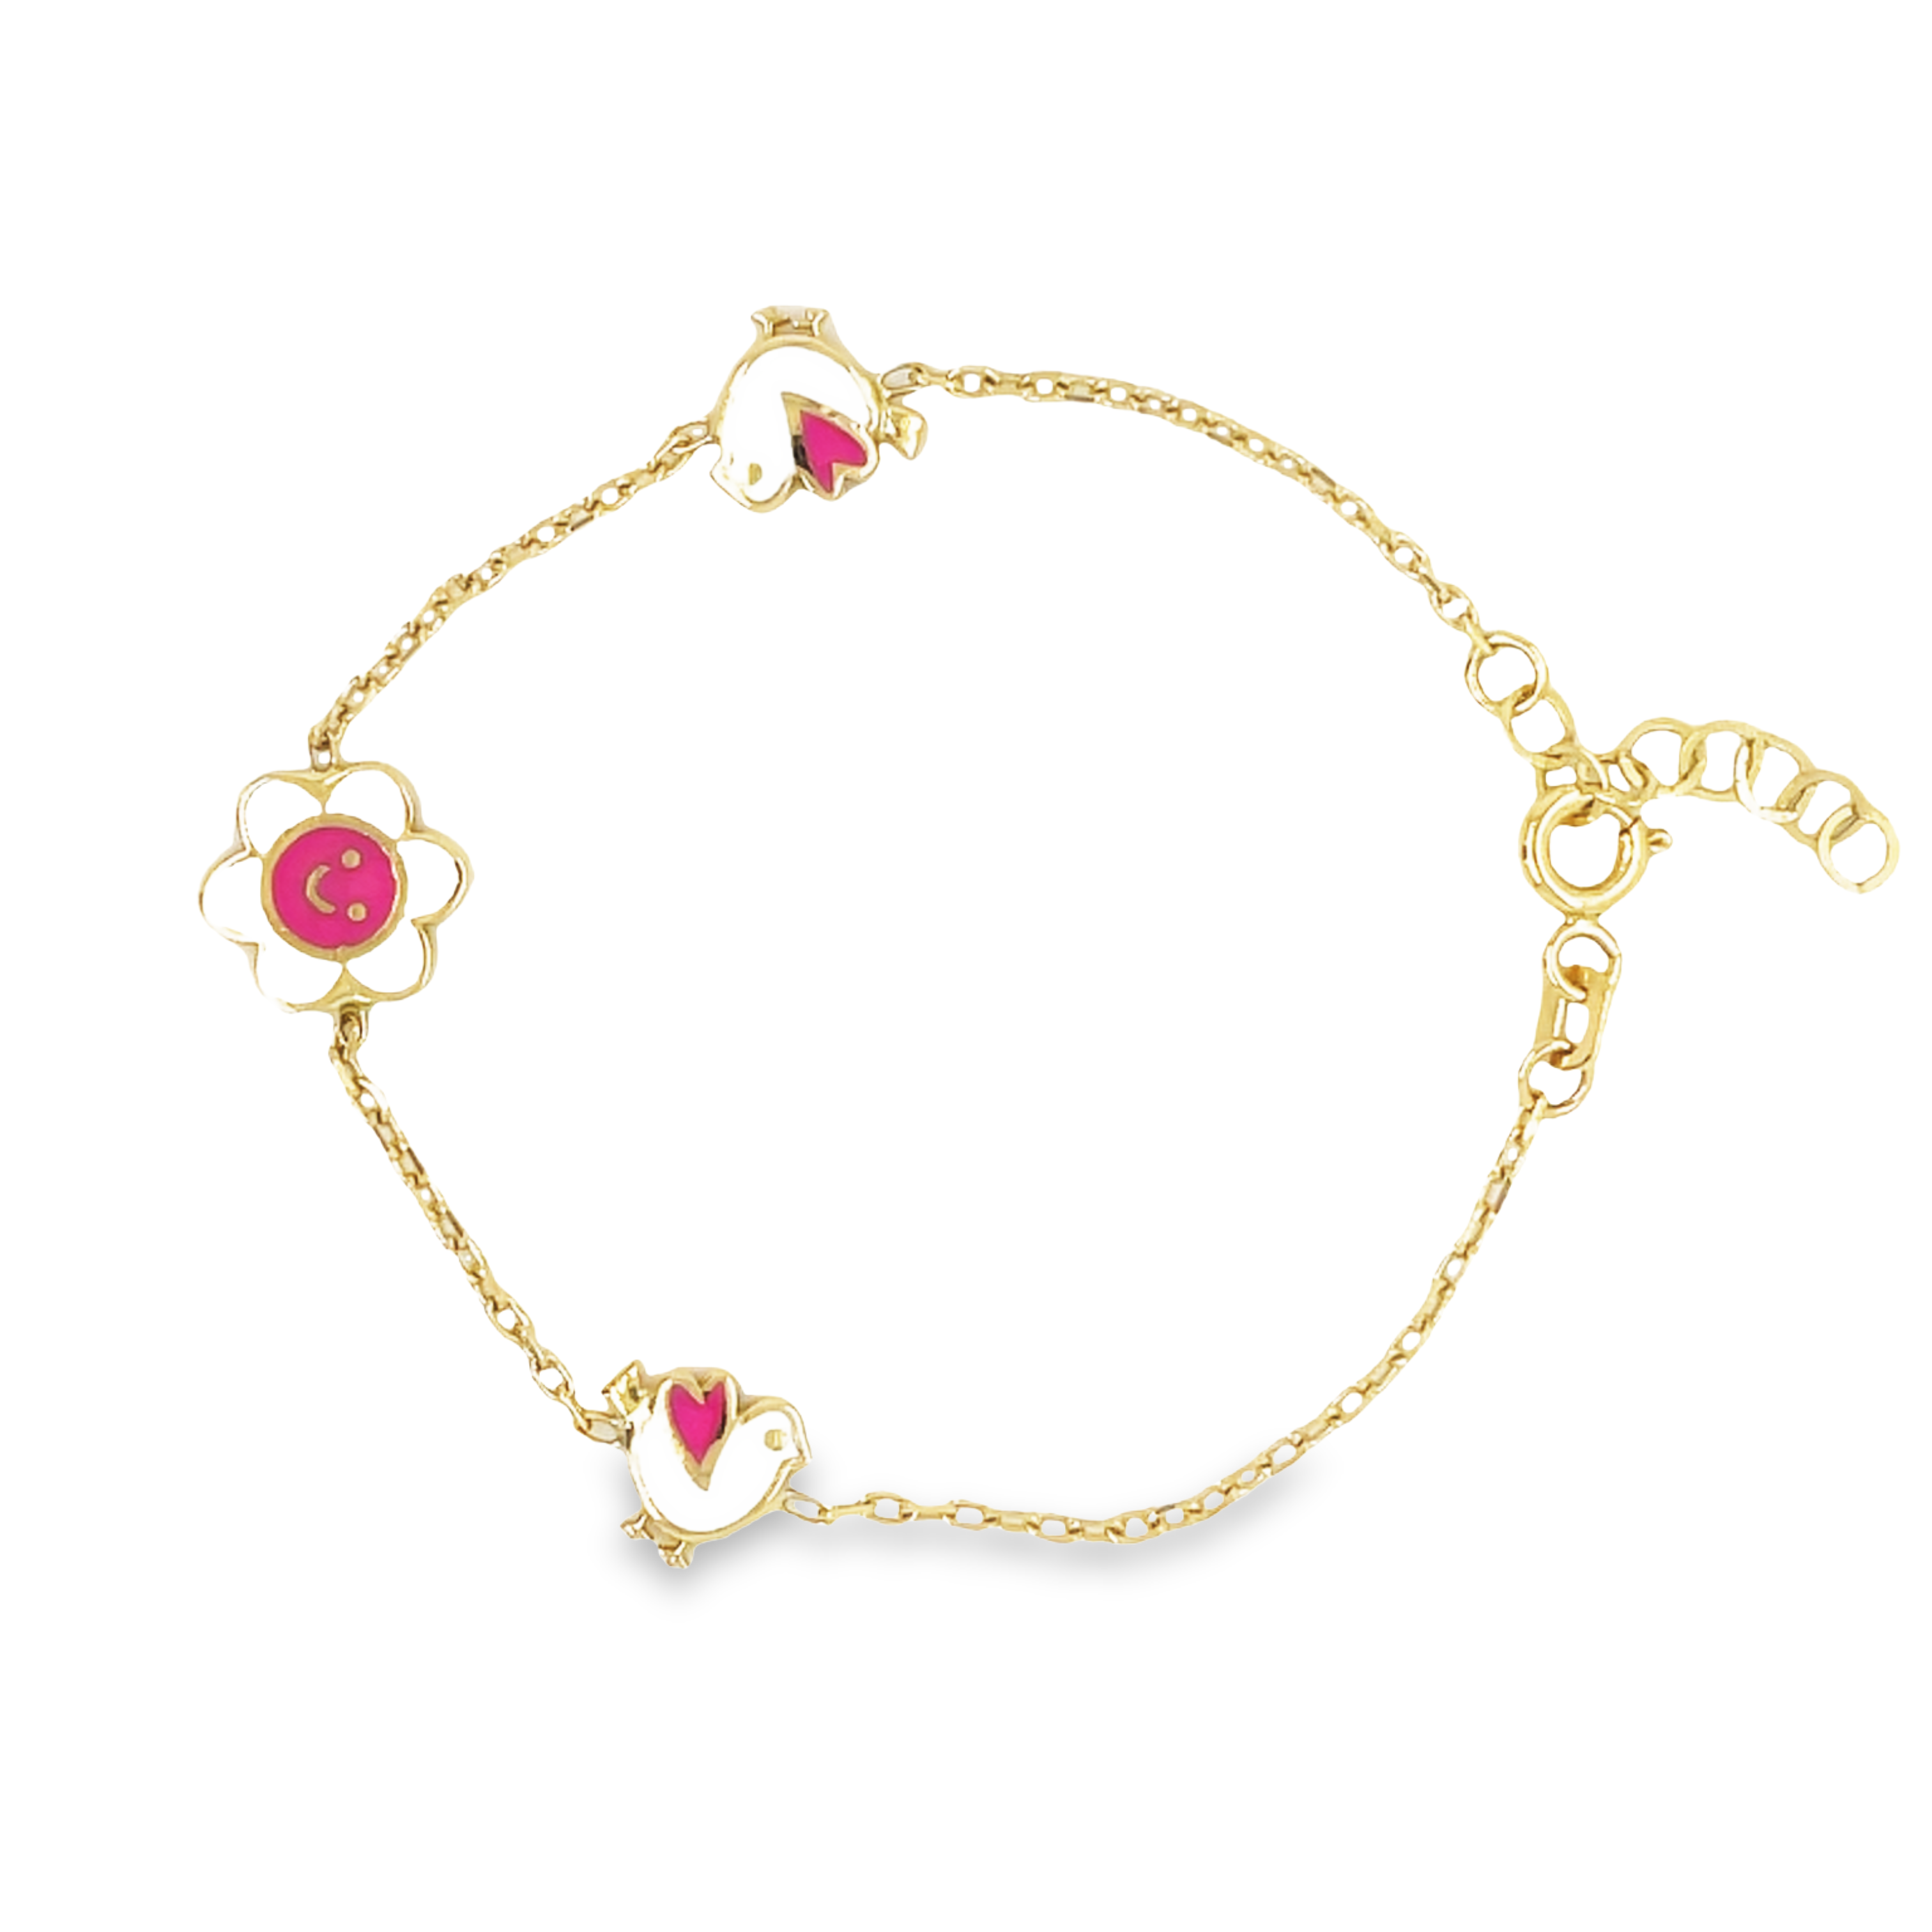 This classic Children's Bracelet is crafted with 14k Yellow Gold and decorated with a flower and birdie charms. The perfect accessory to capture your little one's personality, it's sure to make a lasting impression.